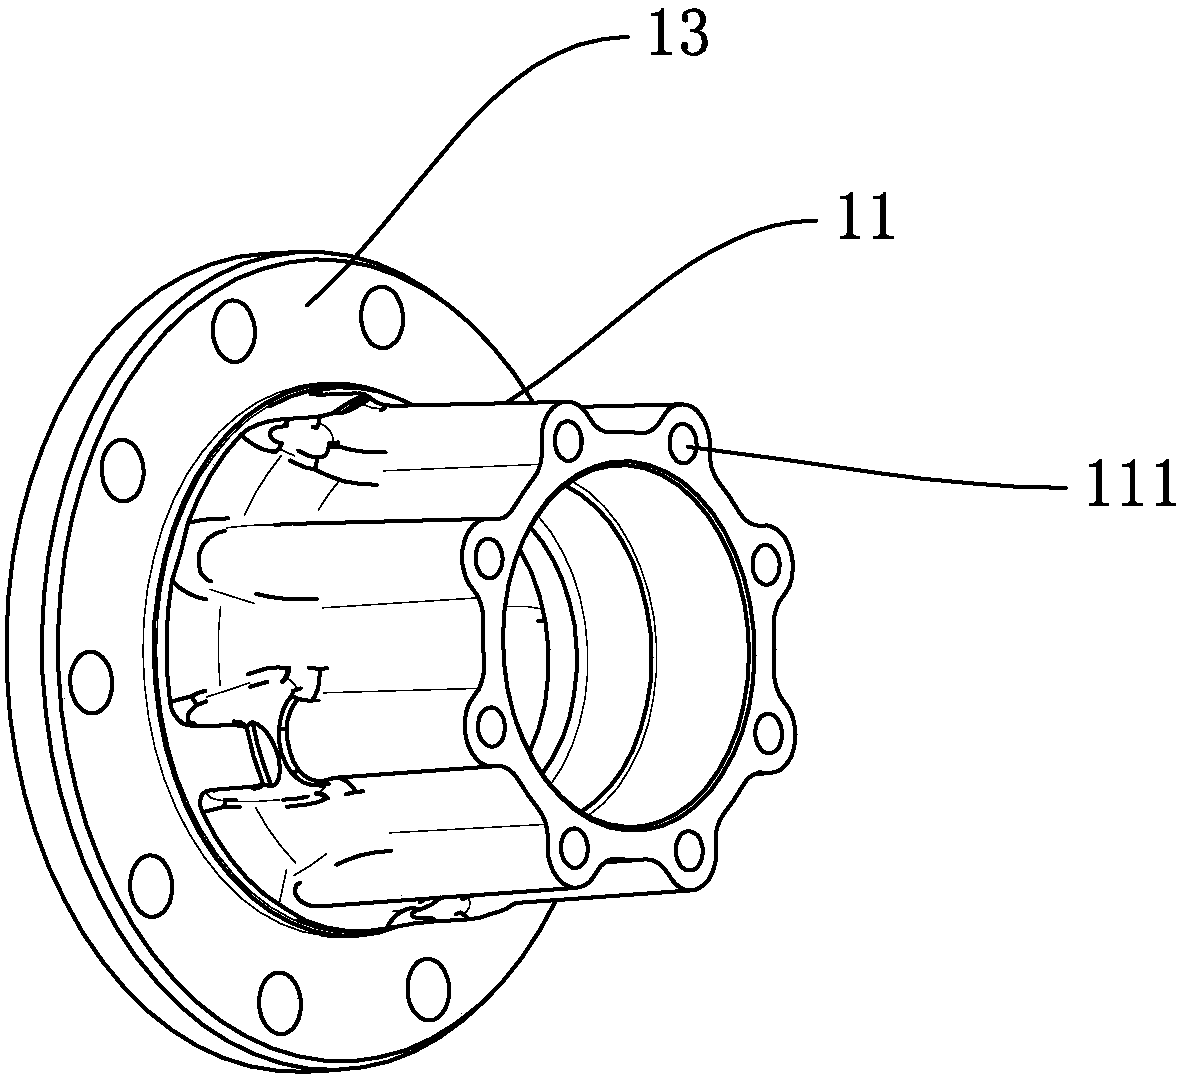 A Casting Process of Rear Axle Hub Connector